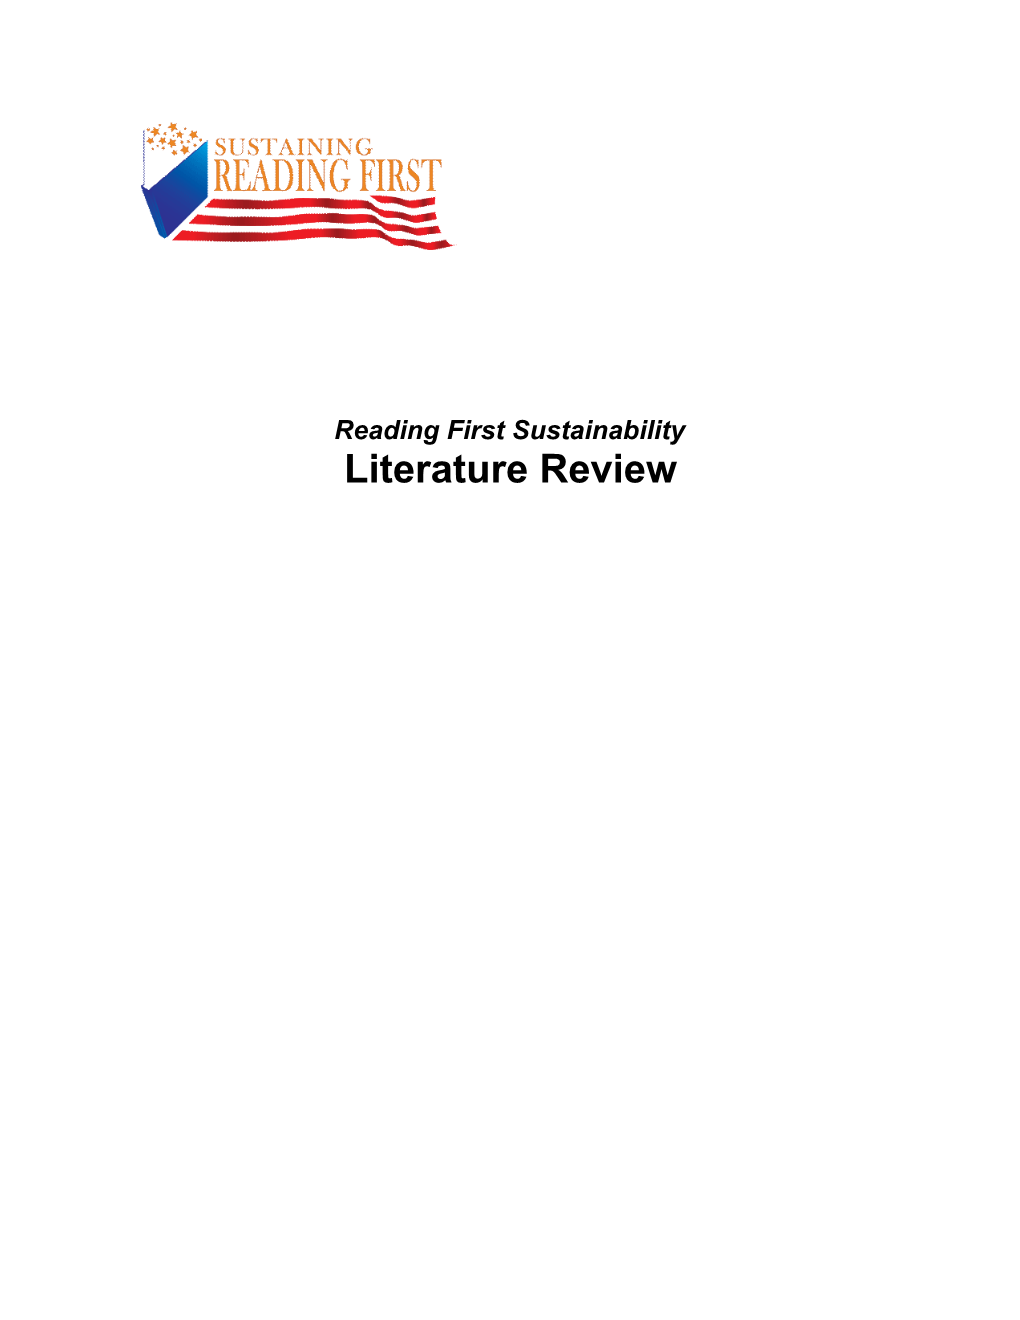 Reading First Sustainability: Literature Review (MS Word)